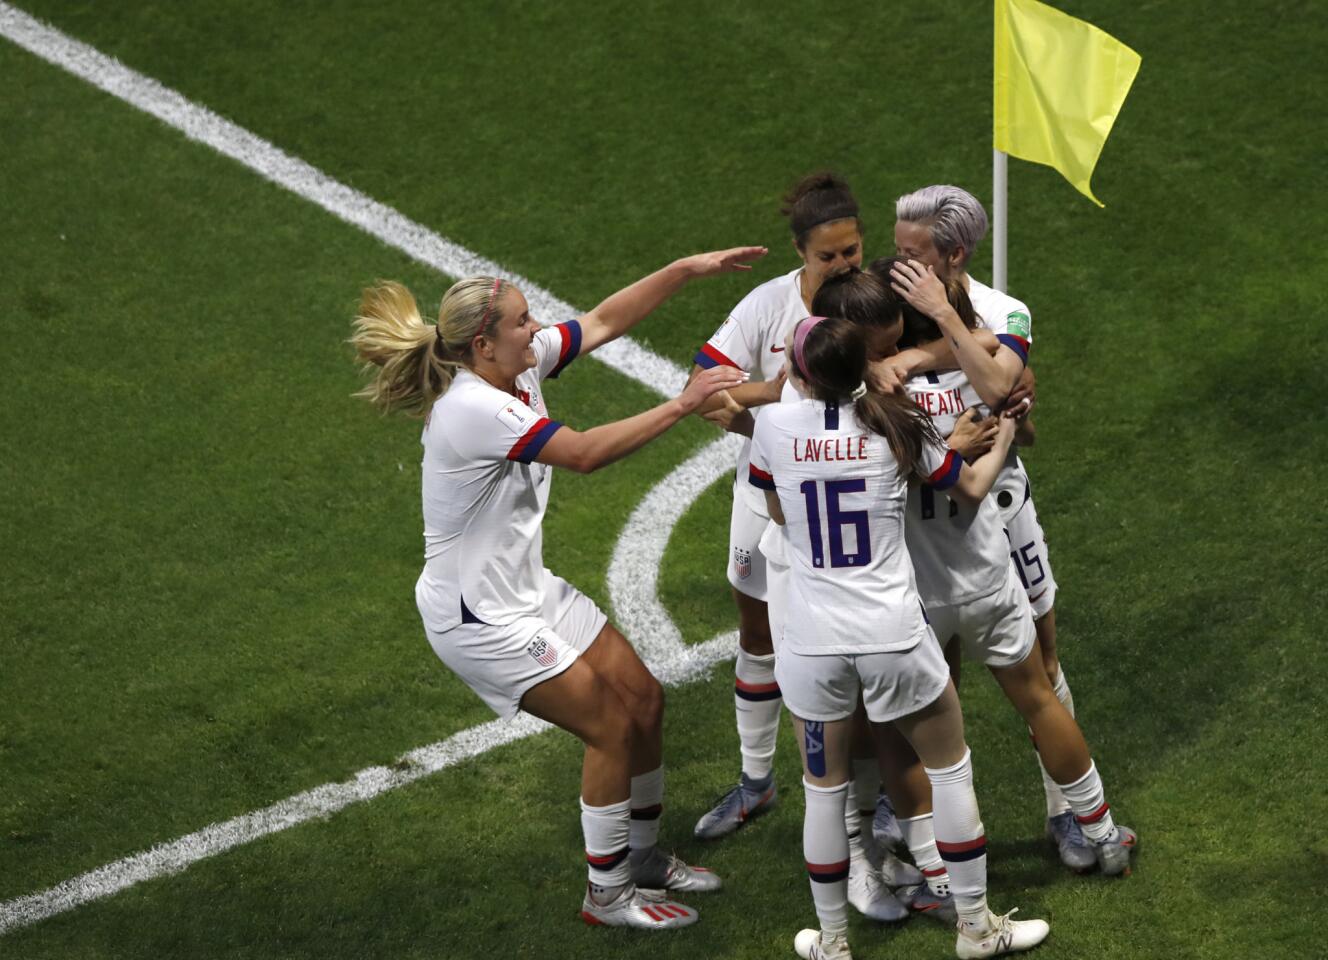 U.S. players celebrate after Tobin Heath scores the team's second goal during a Women's World Cup match against Sweden in France on June 20.